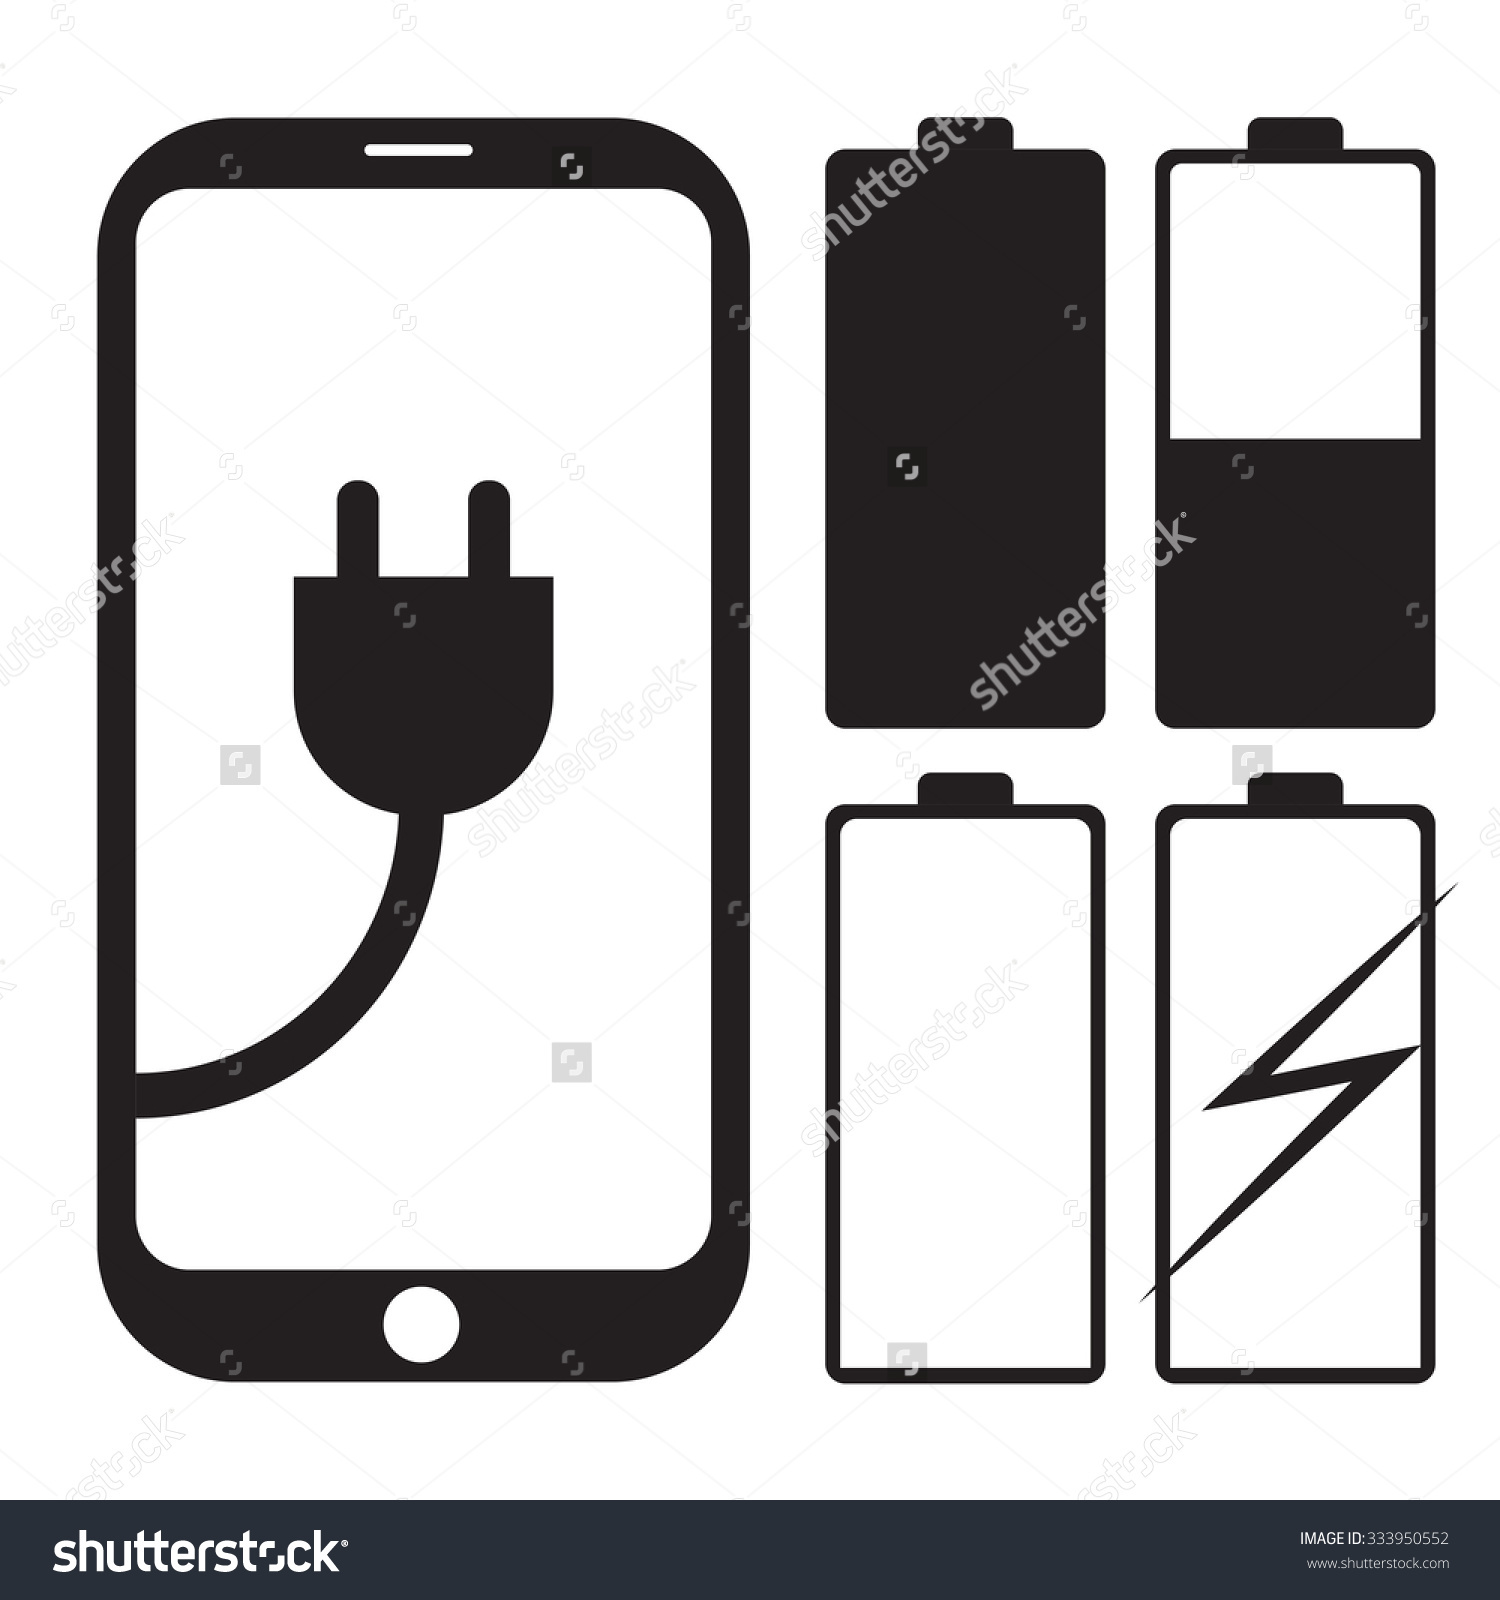 Battery Life Icons Vector Art  Graphics | freevector.com